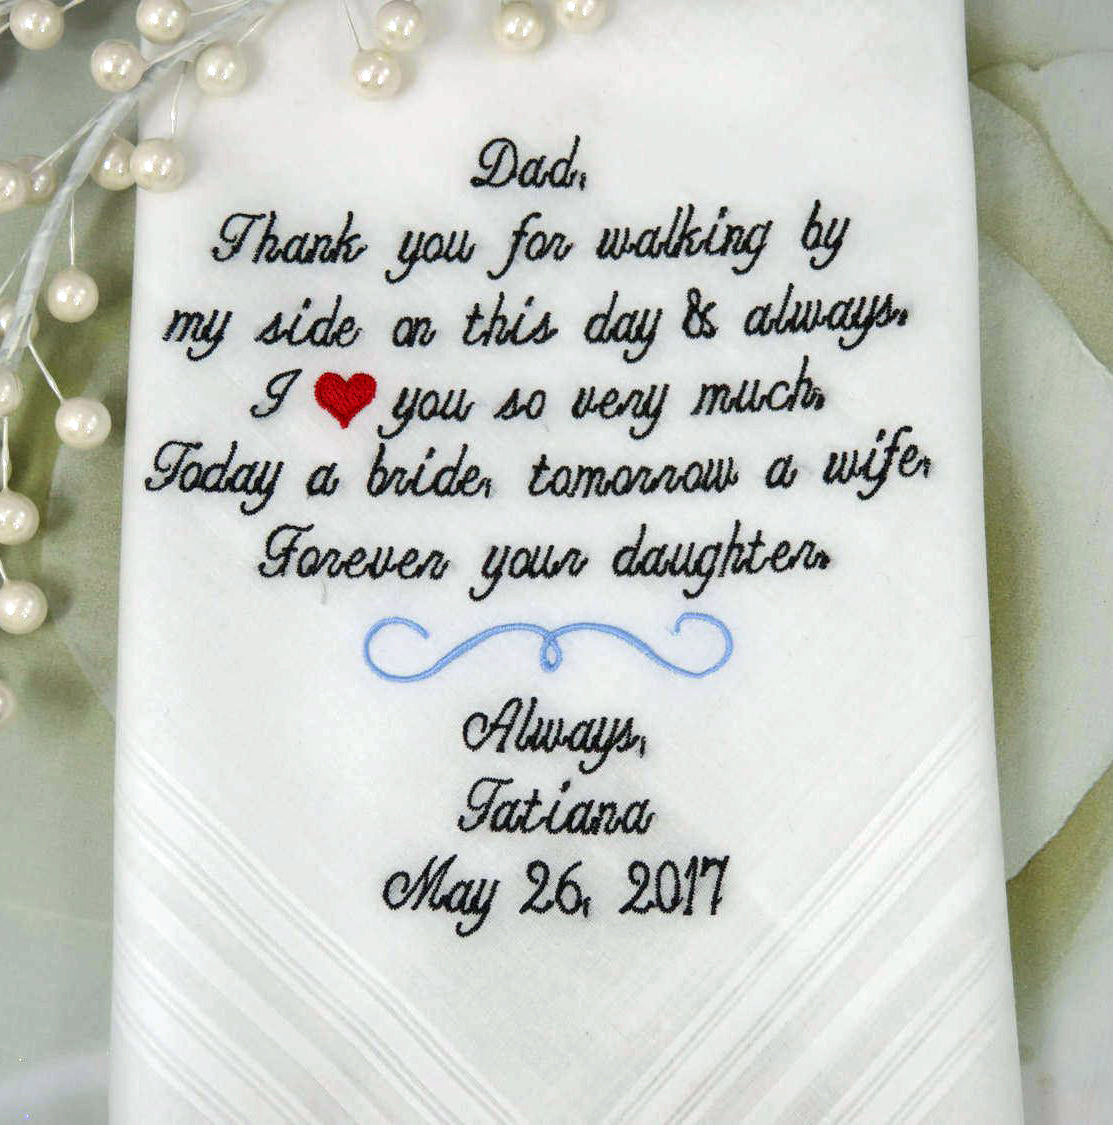 Father of the Bride Gift EMBROIDERED Personalized Wedding Handkerchief Wedding Gift For Dad From The Bride You may choose up to 40 words.